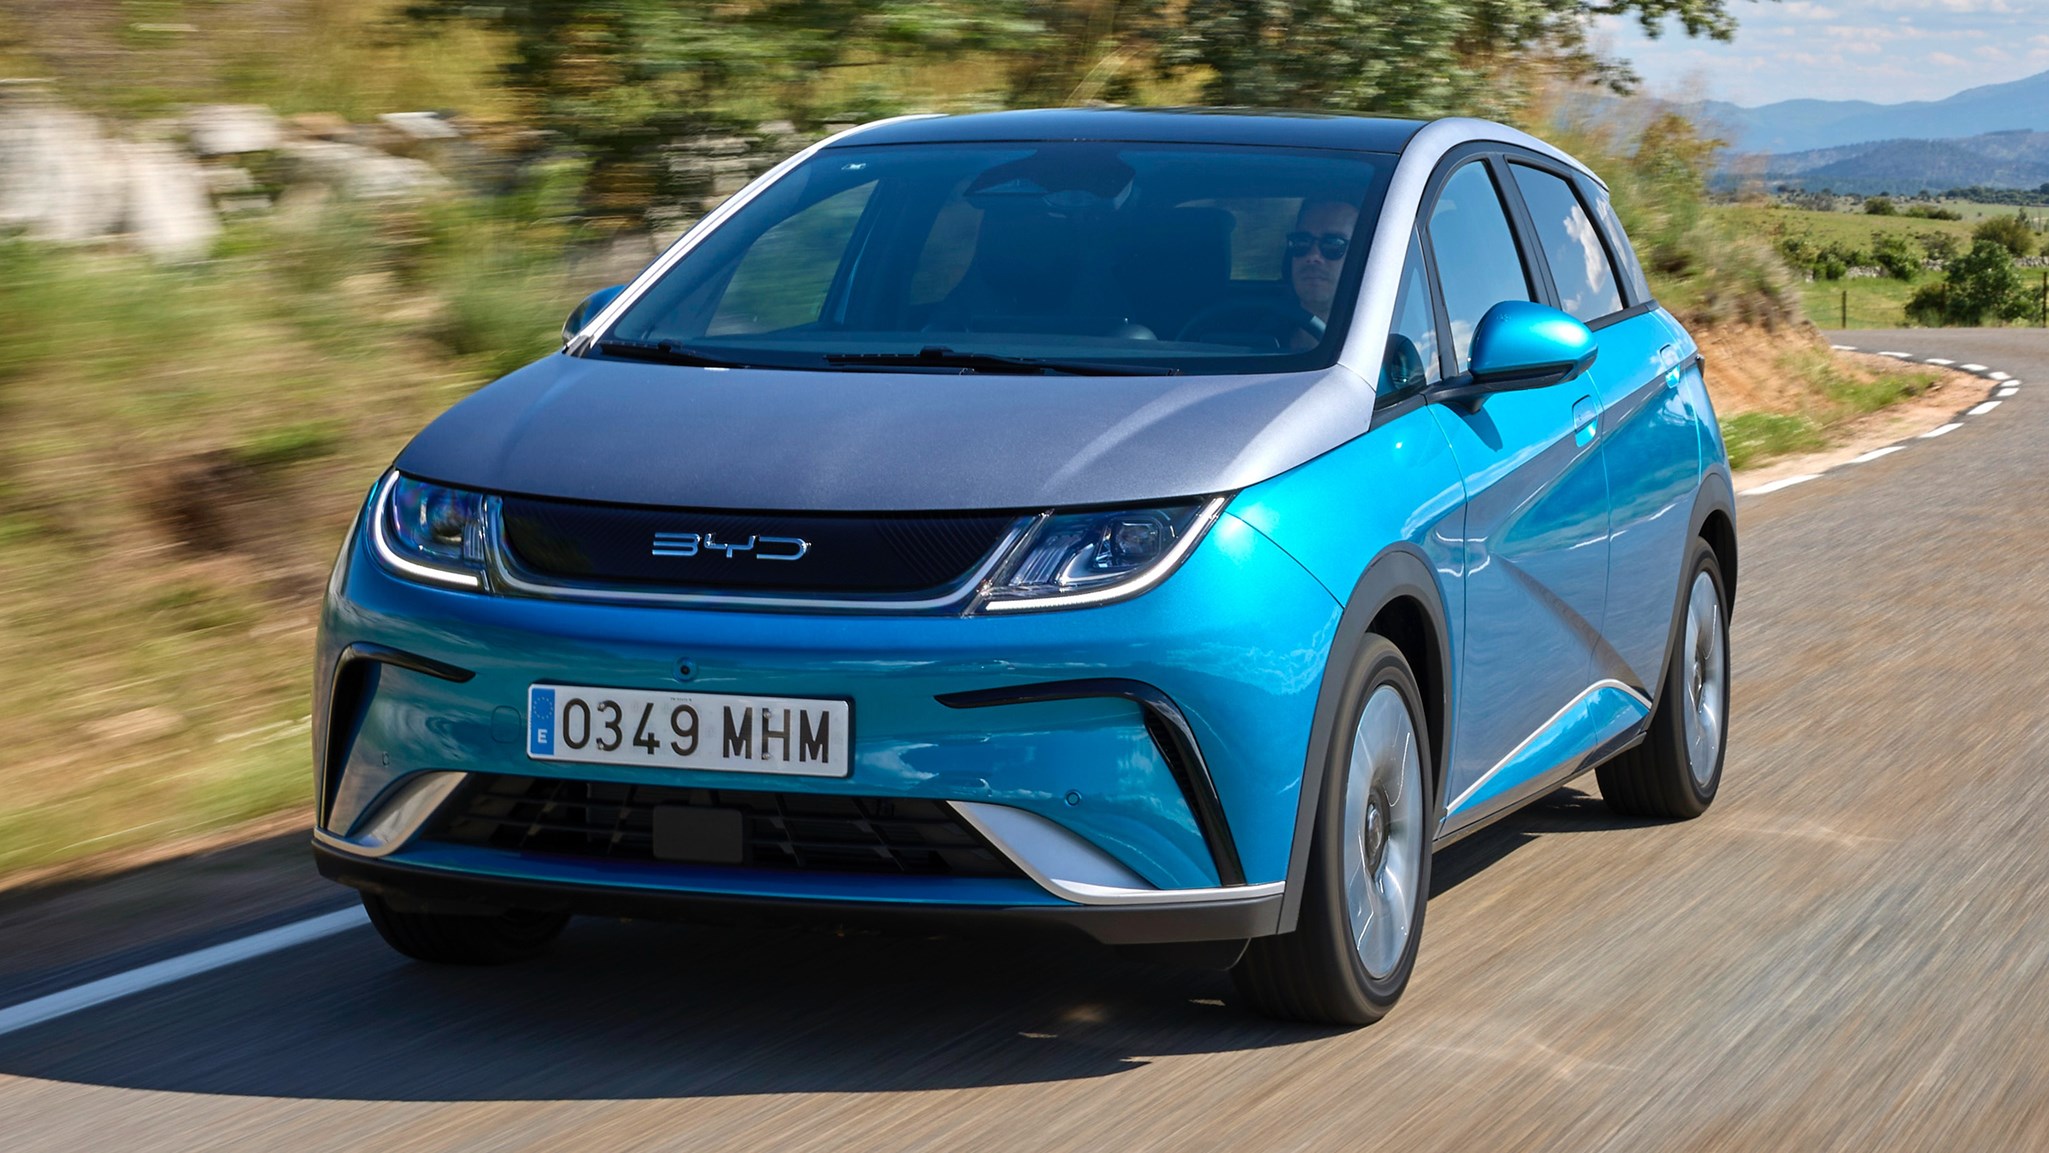 The most affordable electric vehicles in 2022 and 2023